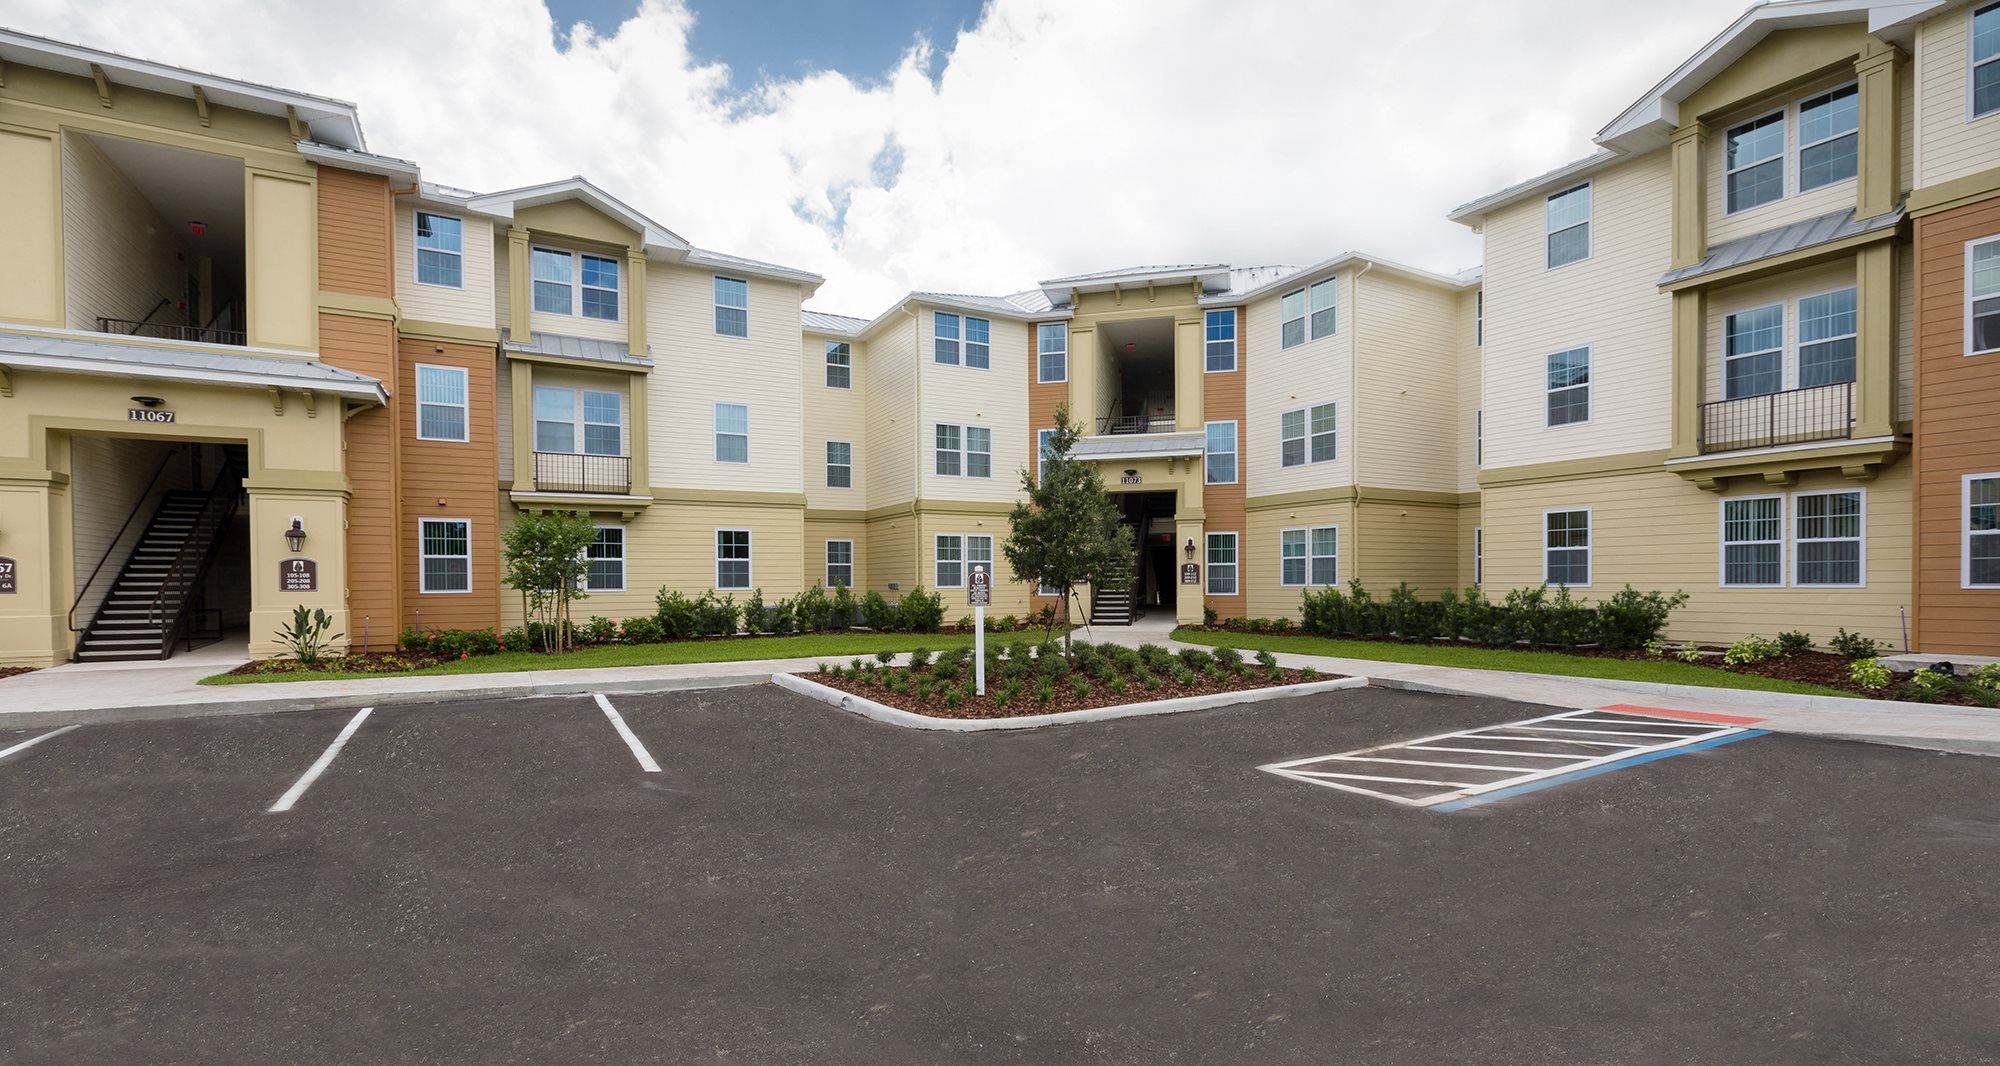 Best Apartments For Rent In Orlando That Accept Evictions Ideas in 2022